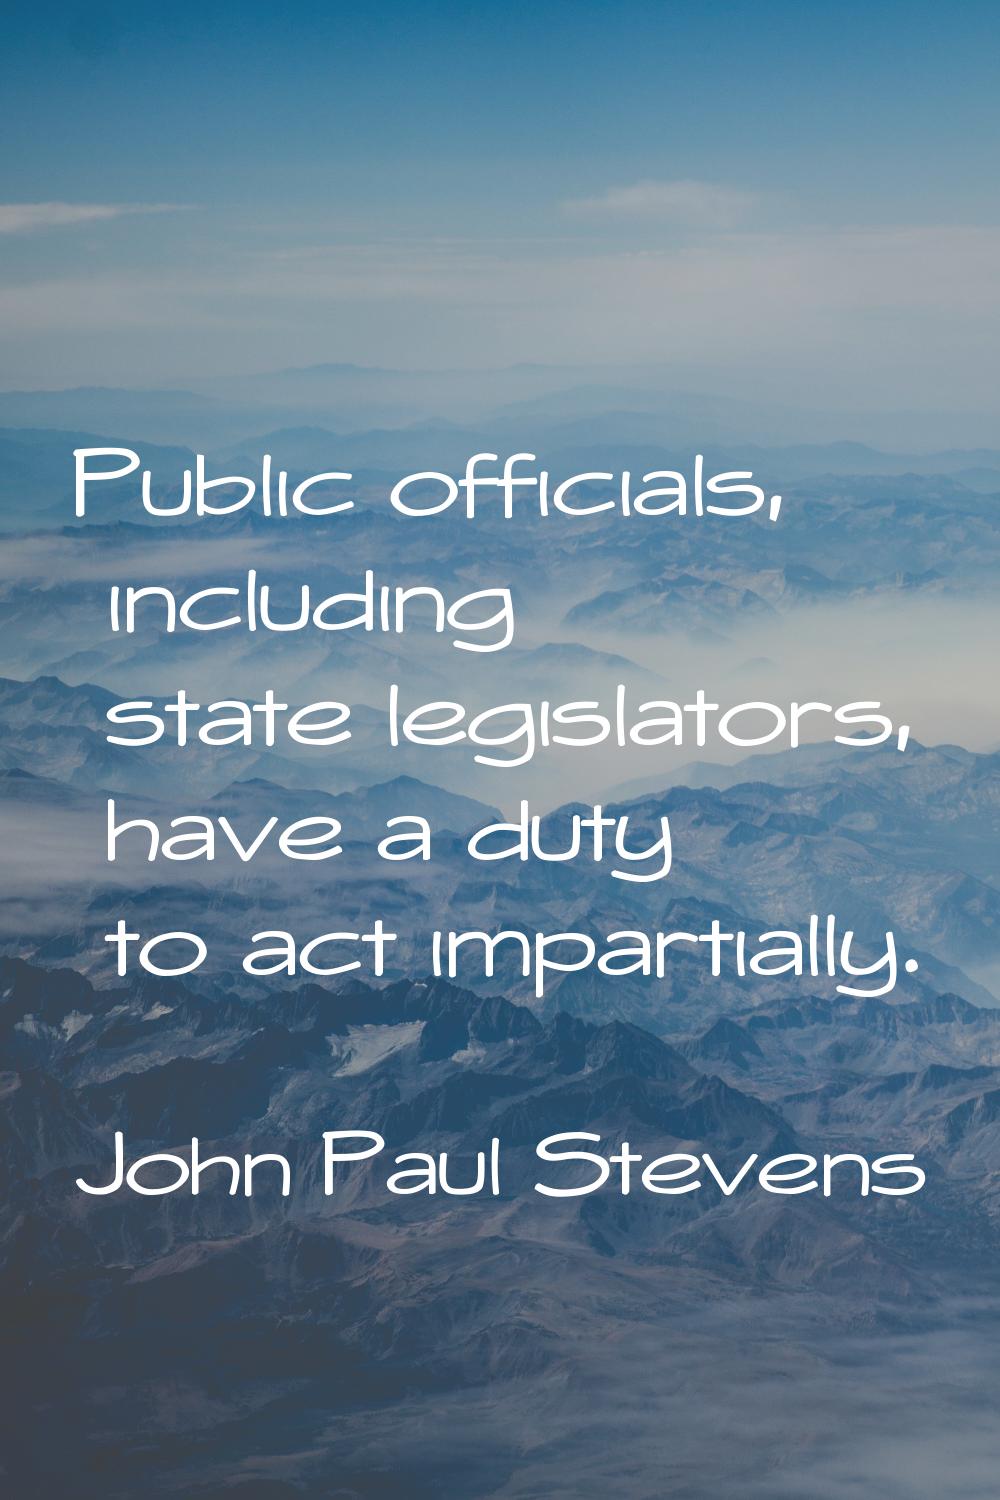 Public officials, including state legislators, have a duty to act impartially.